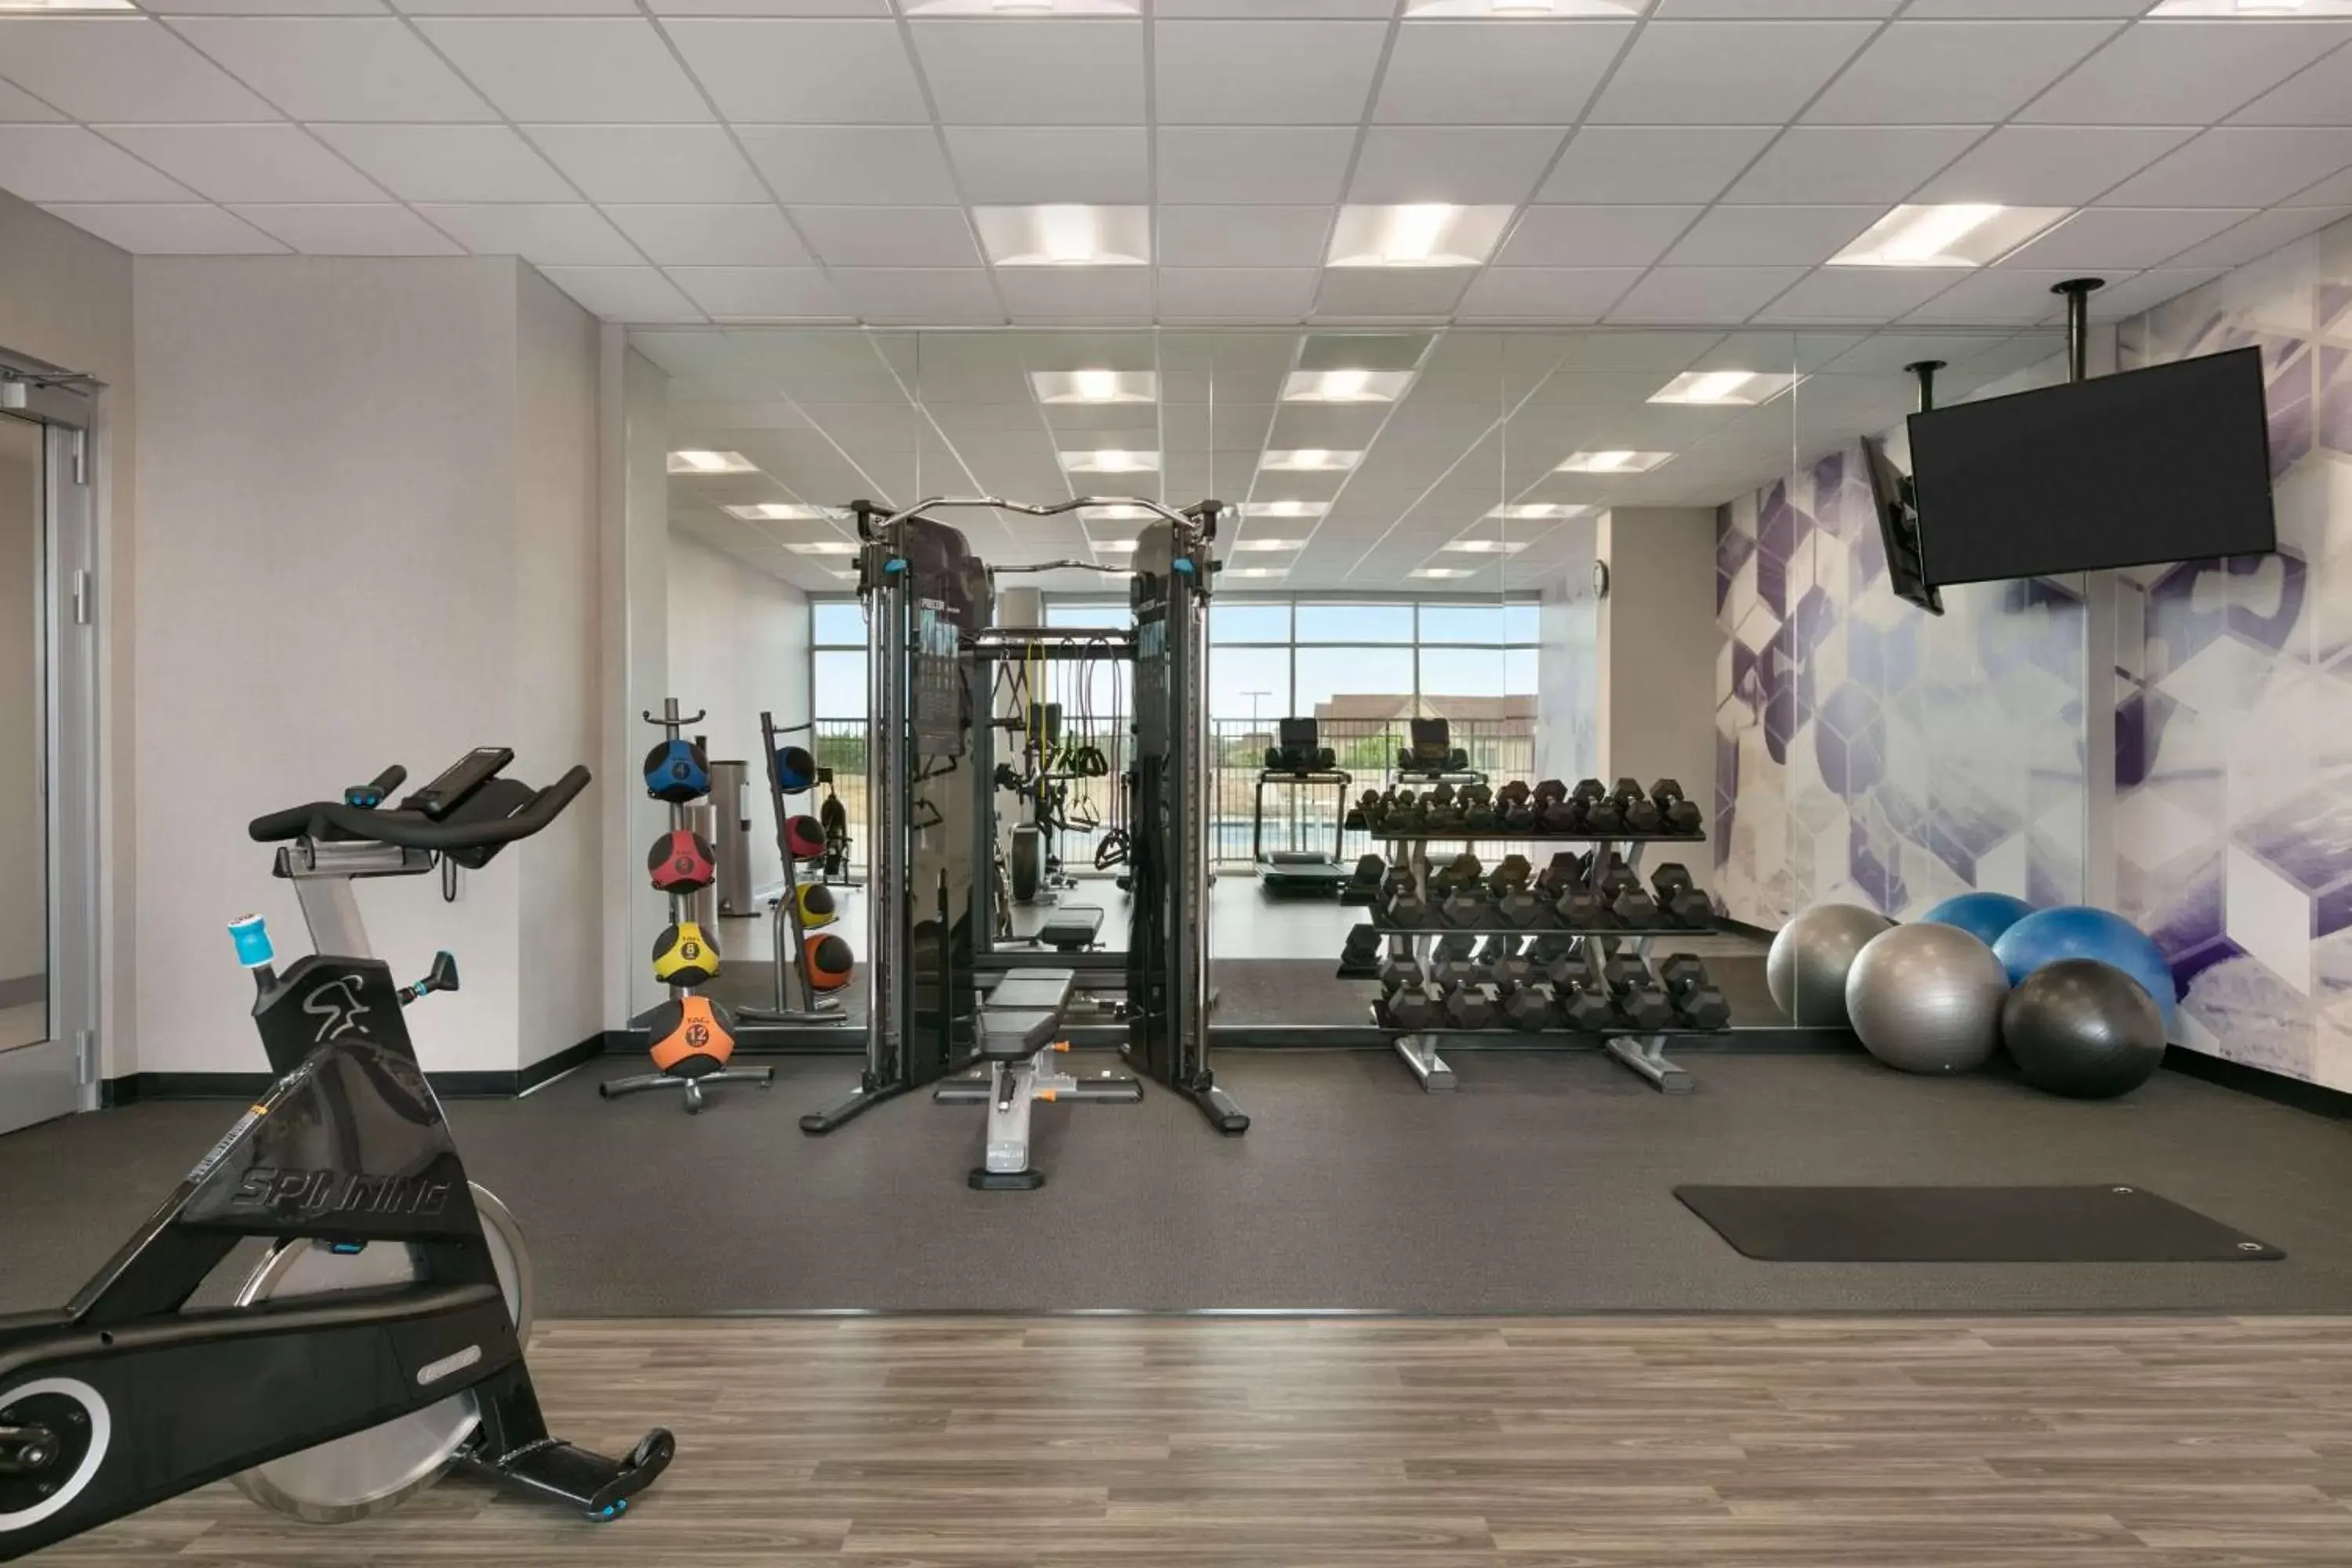 Fitness centre/facilities, Fitness Center/Facilities in Hyatt Place Fort Worth/TCU